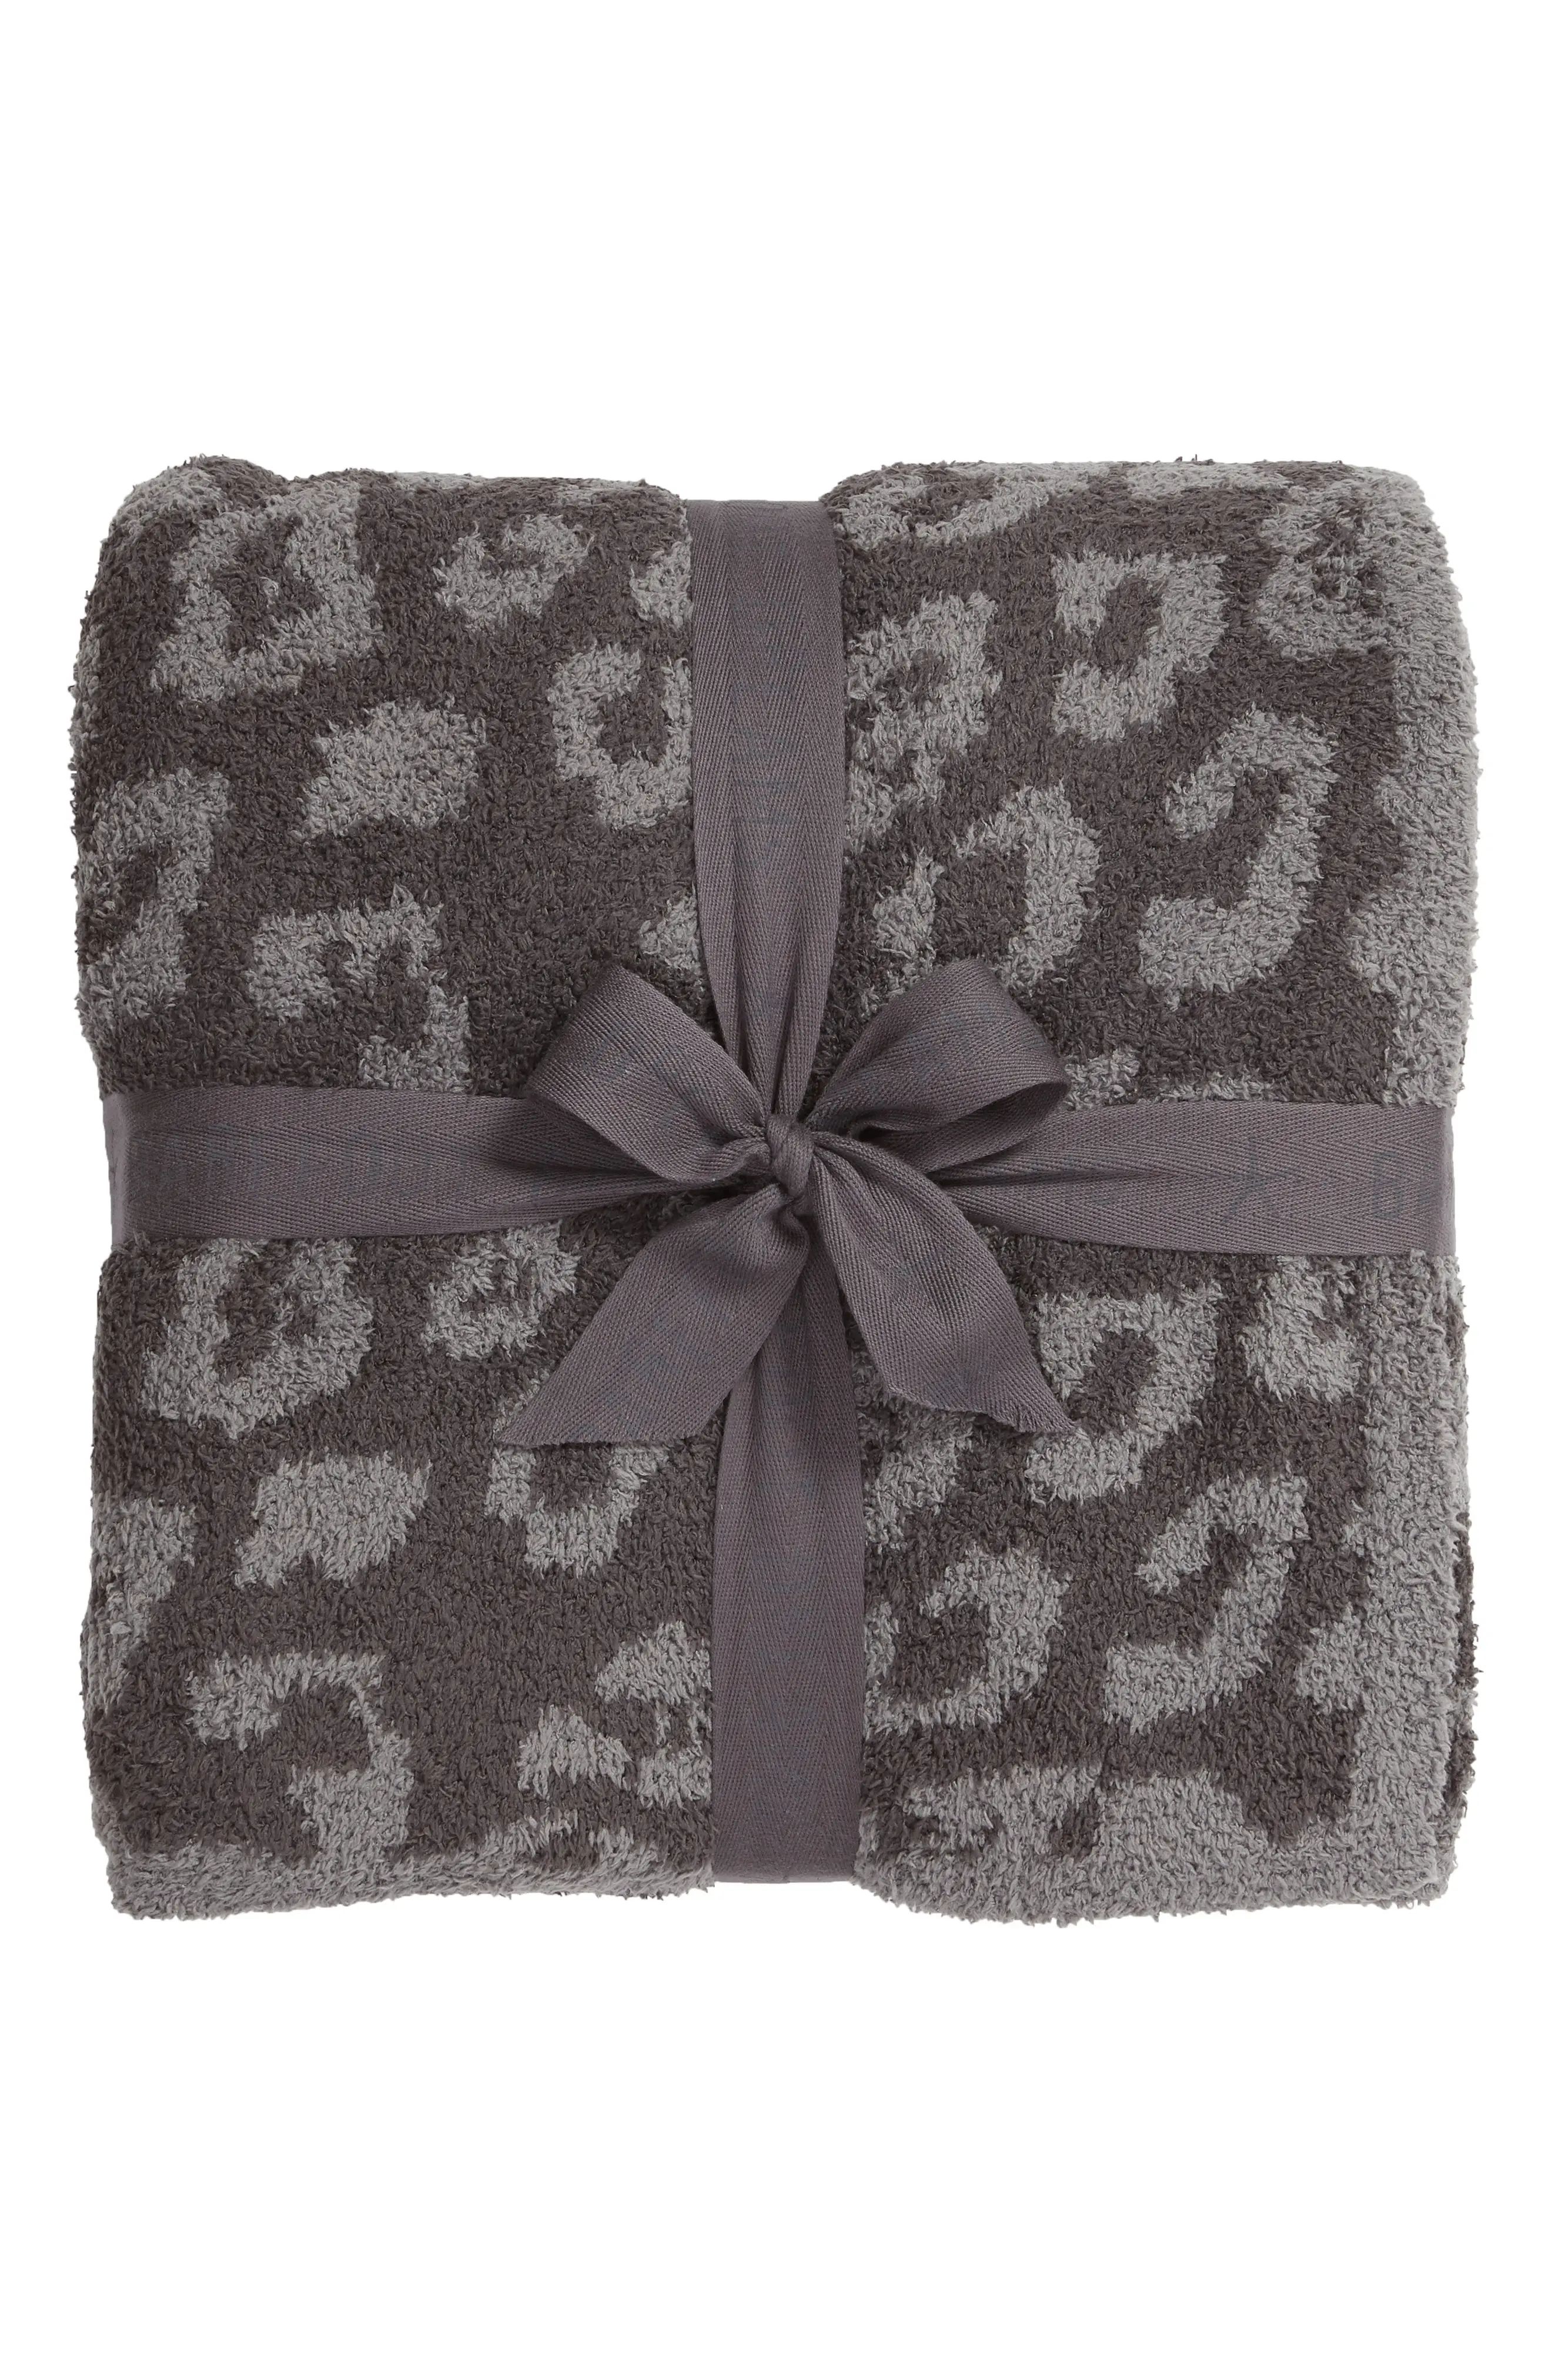 Barefoot Dreams Cozychic 'In The Wild' Throw Blanket, Size One Size - Grey | Nordstrom